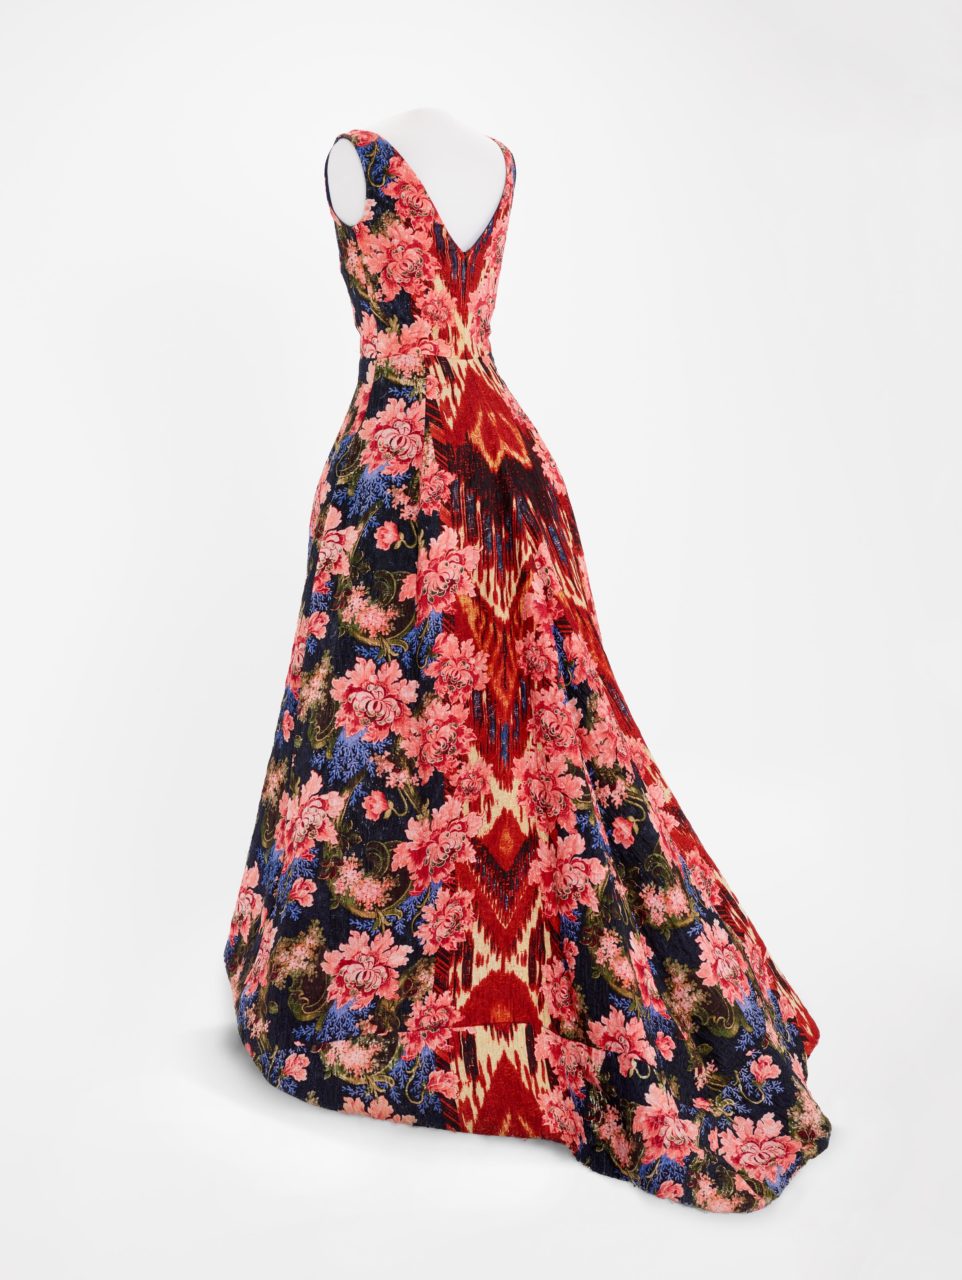 Ikat-patterned gown